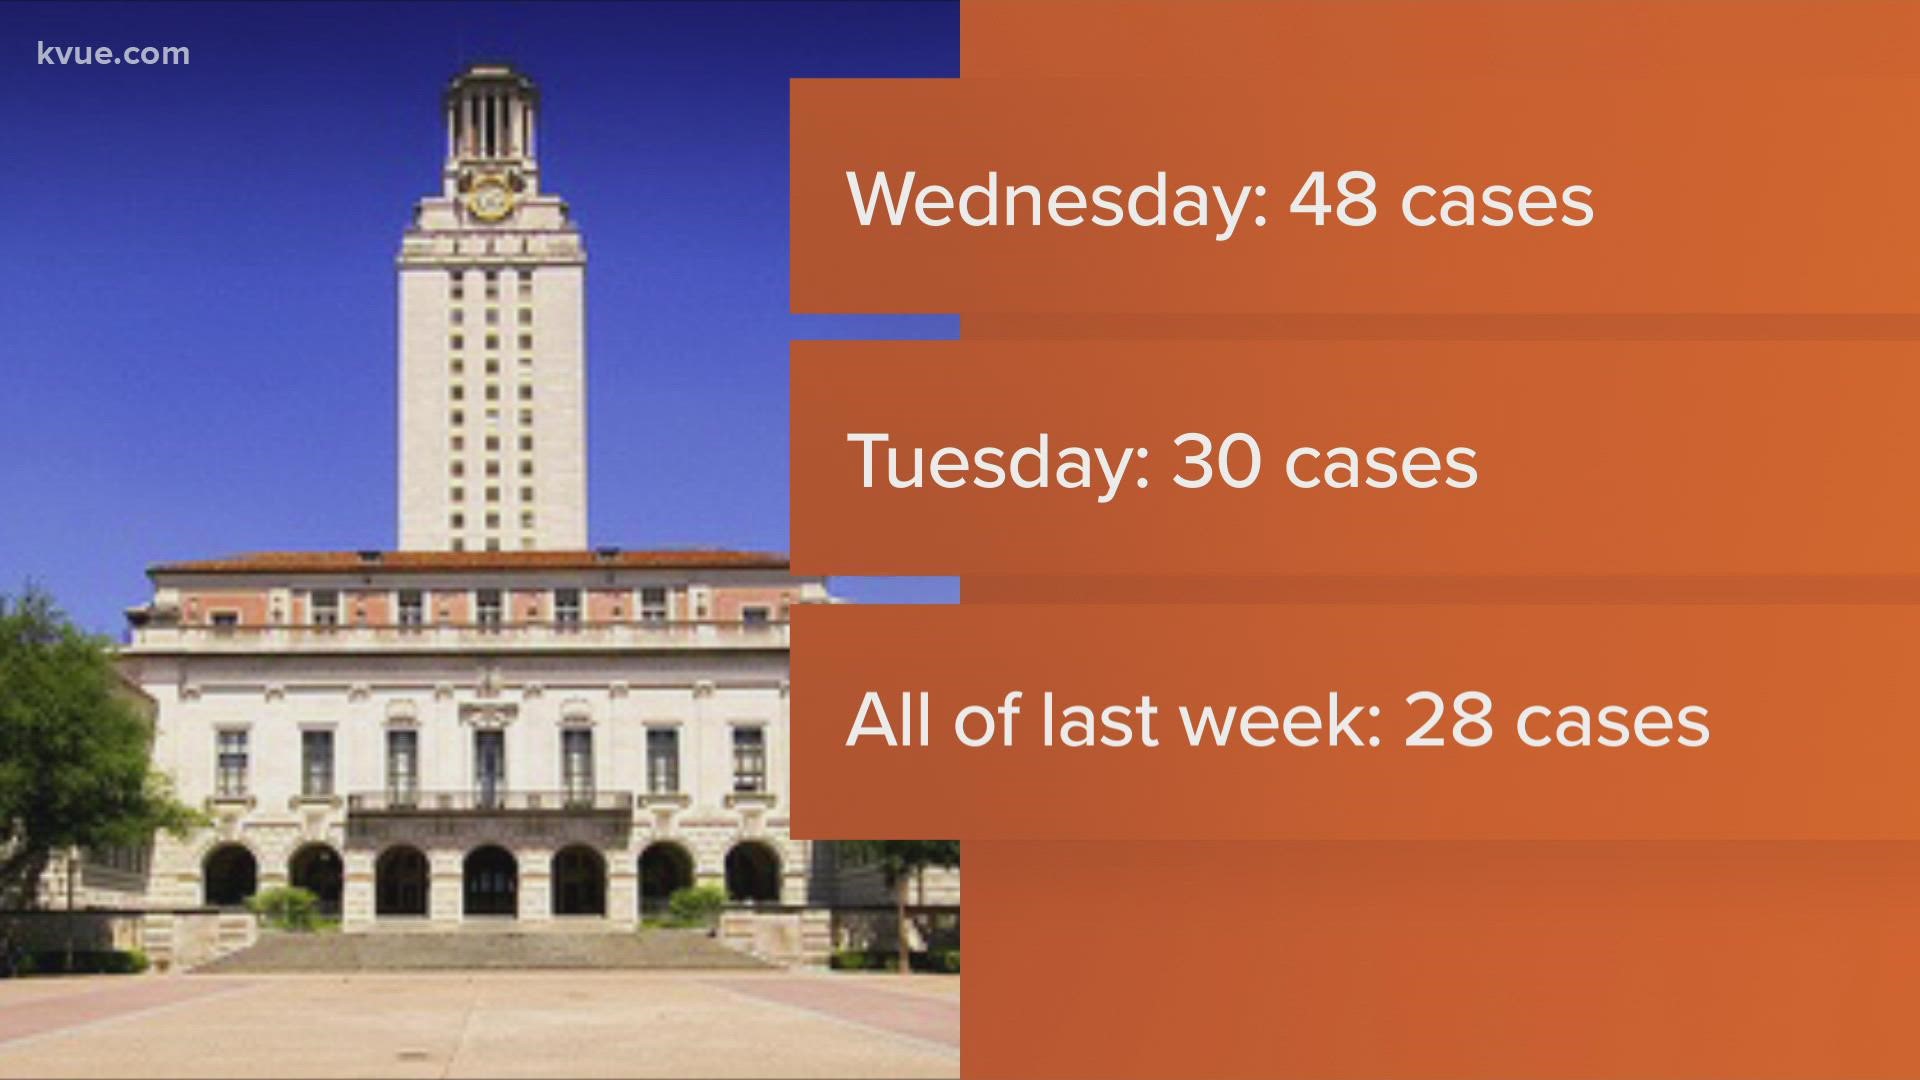 Leaders at the University of Texas are warning about a recent surge in COVID-19 cases.